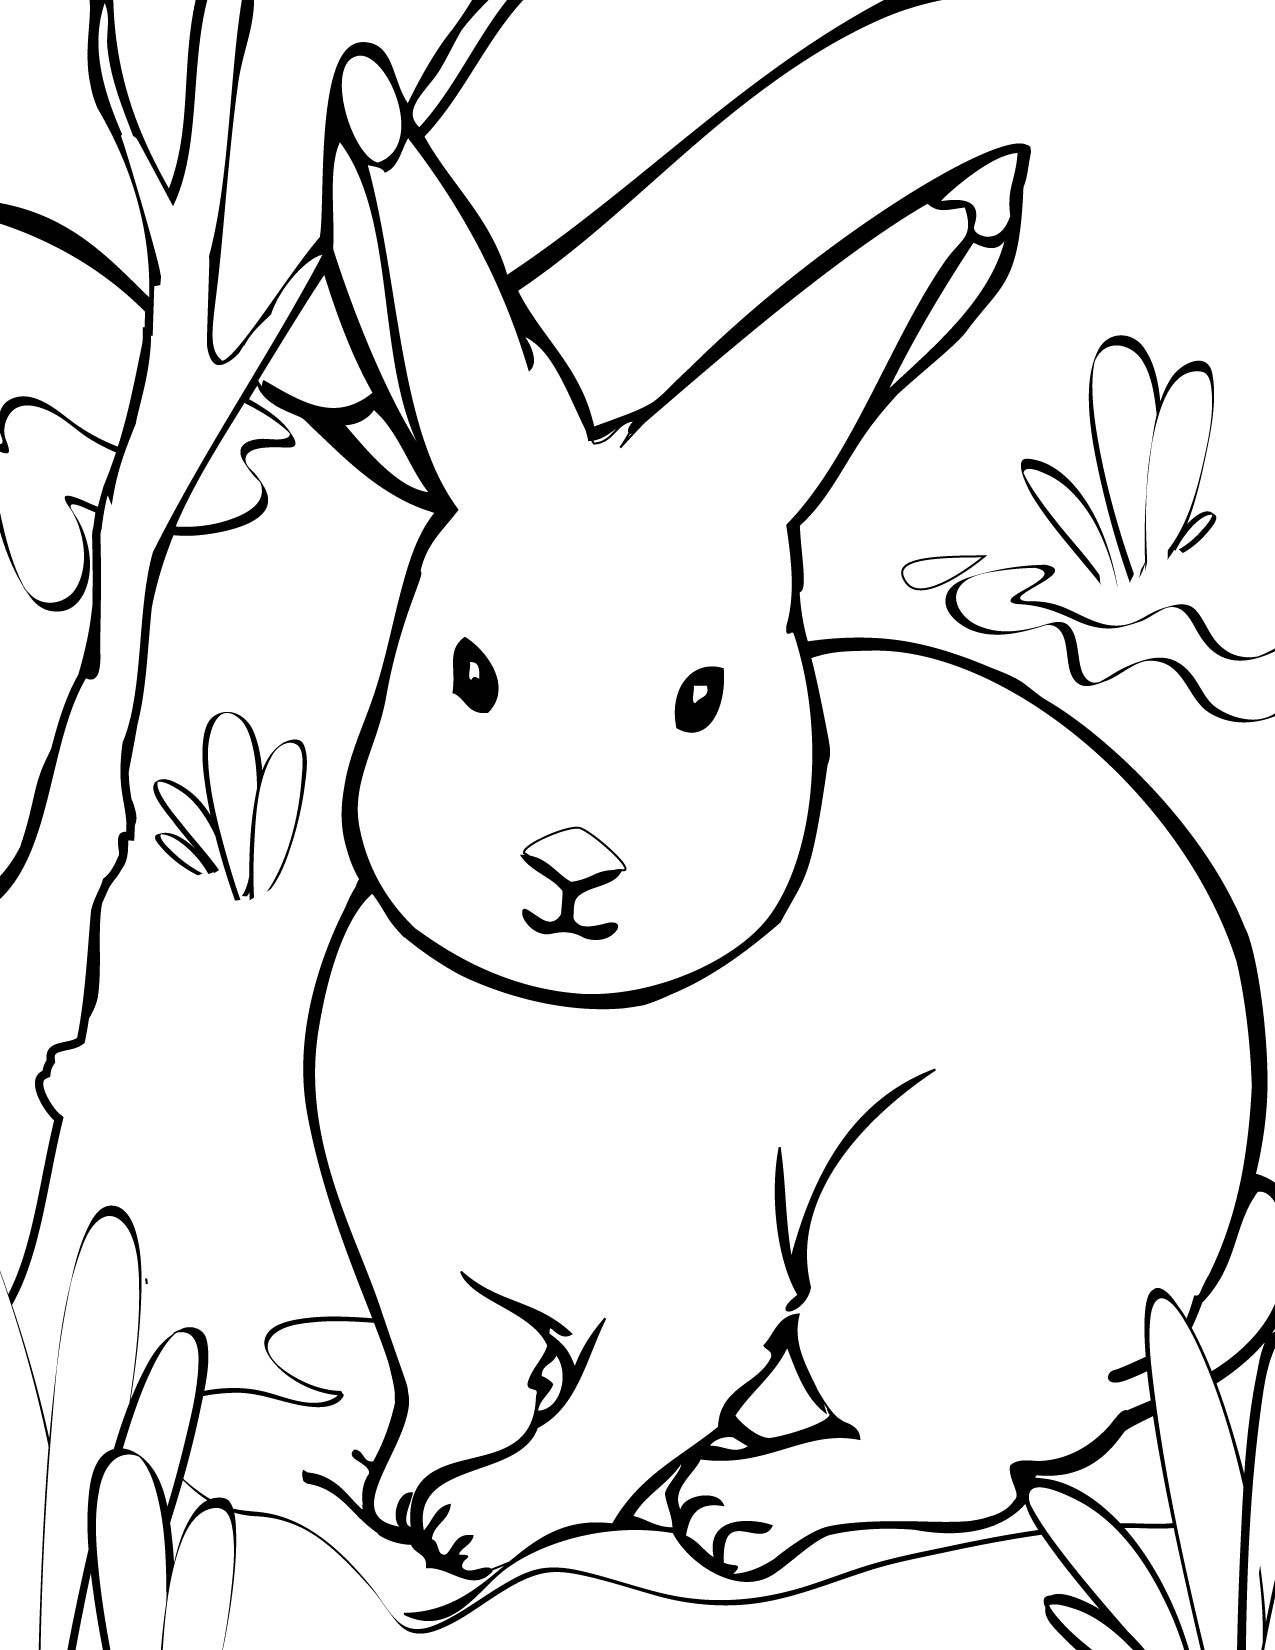 Arctic Animals Coloring Pages at GetColorings.com | Free printable